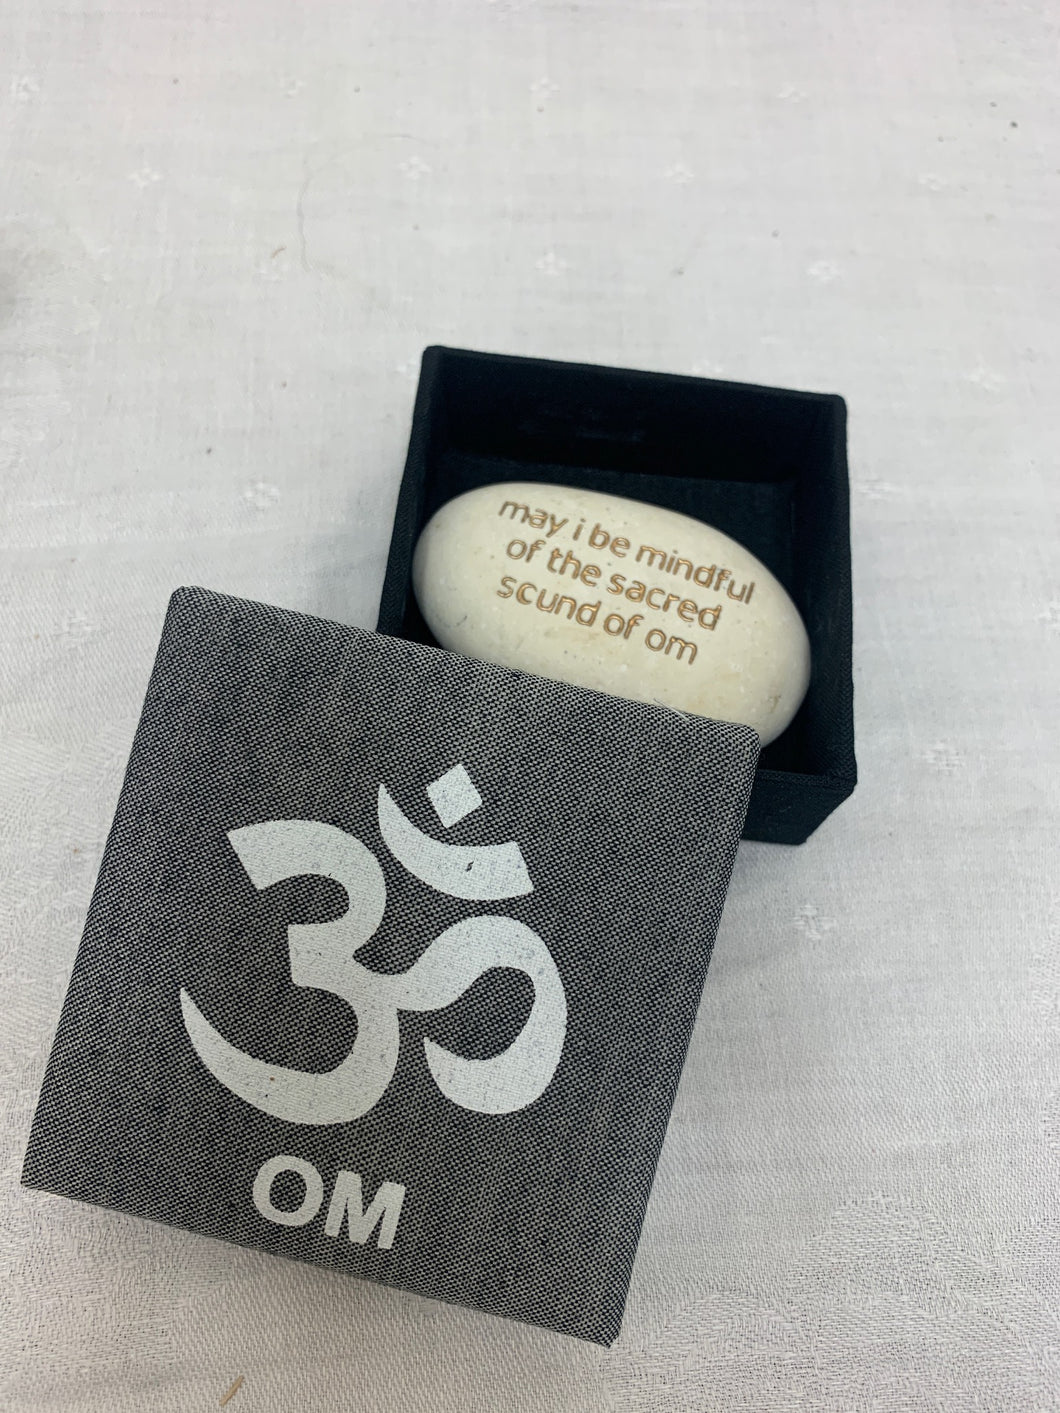 box - affirmation OM - grey - stone  'may I be mindful of the sacred sound of Om'